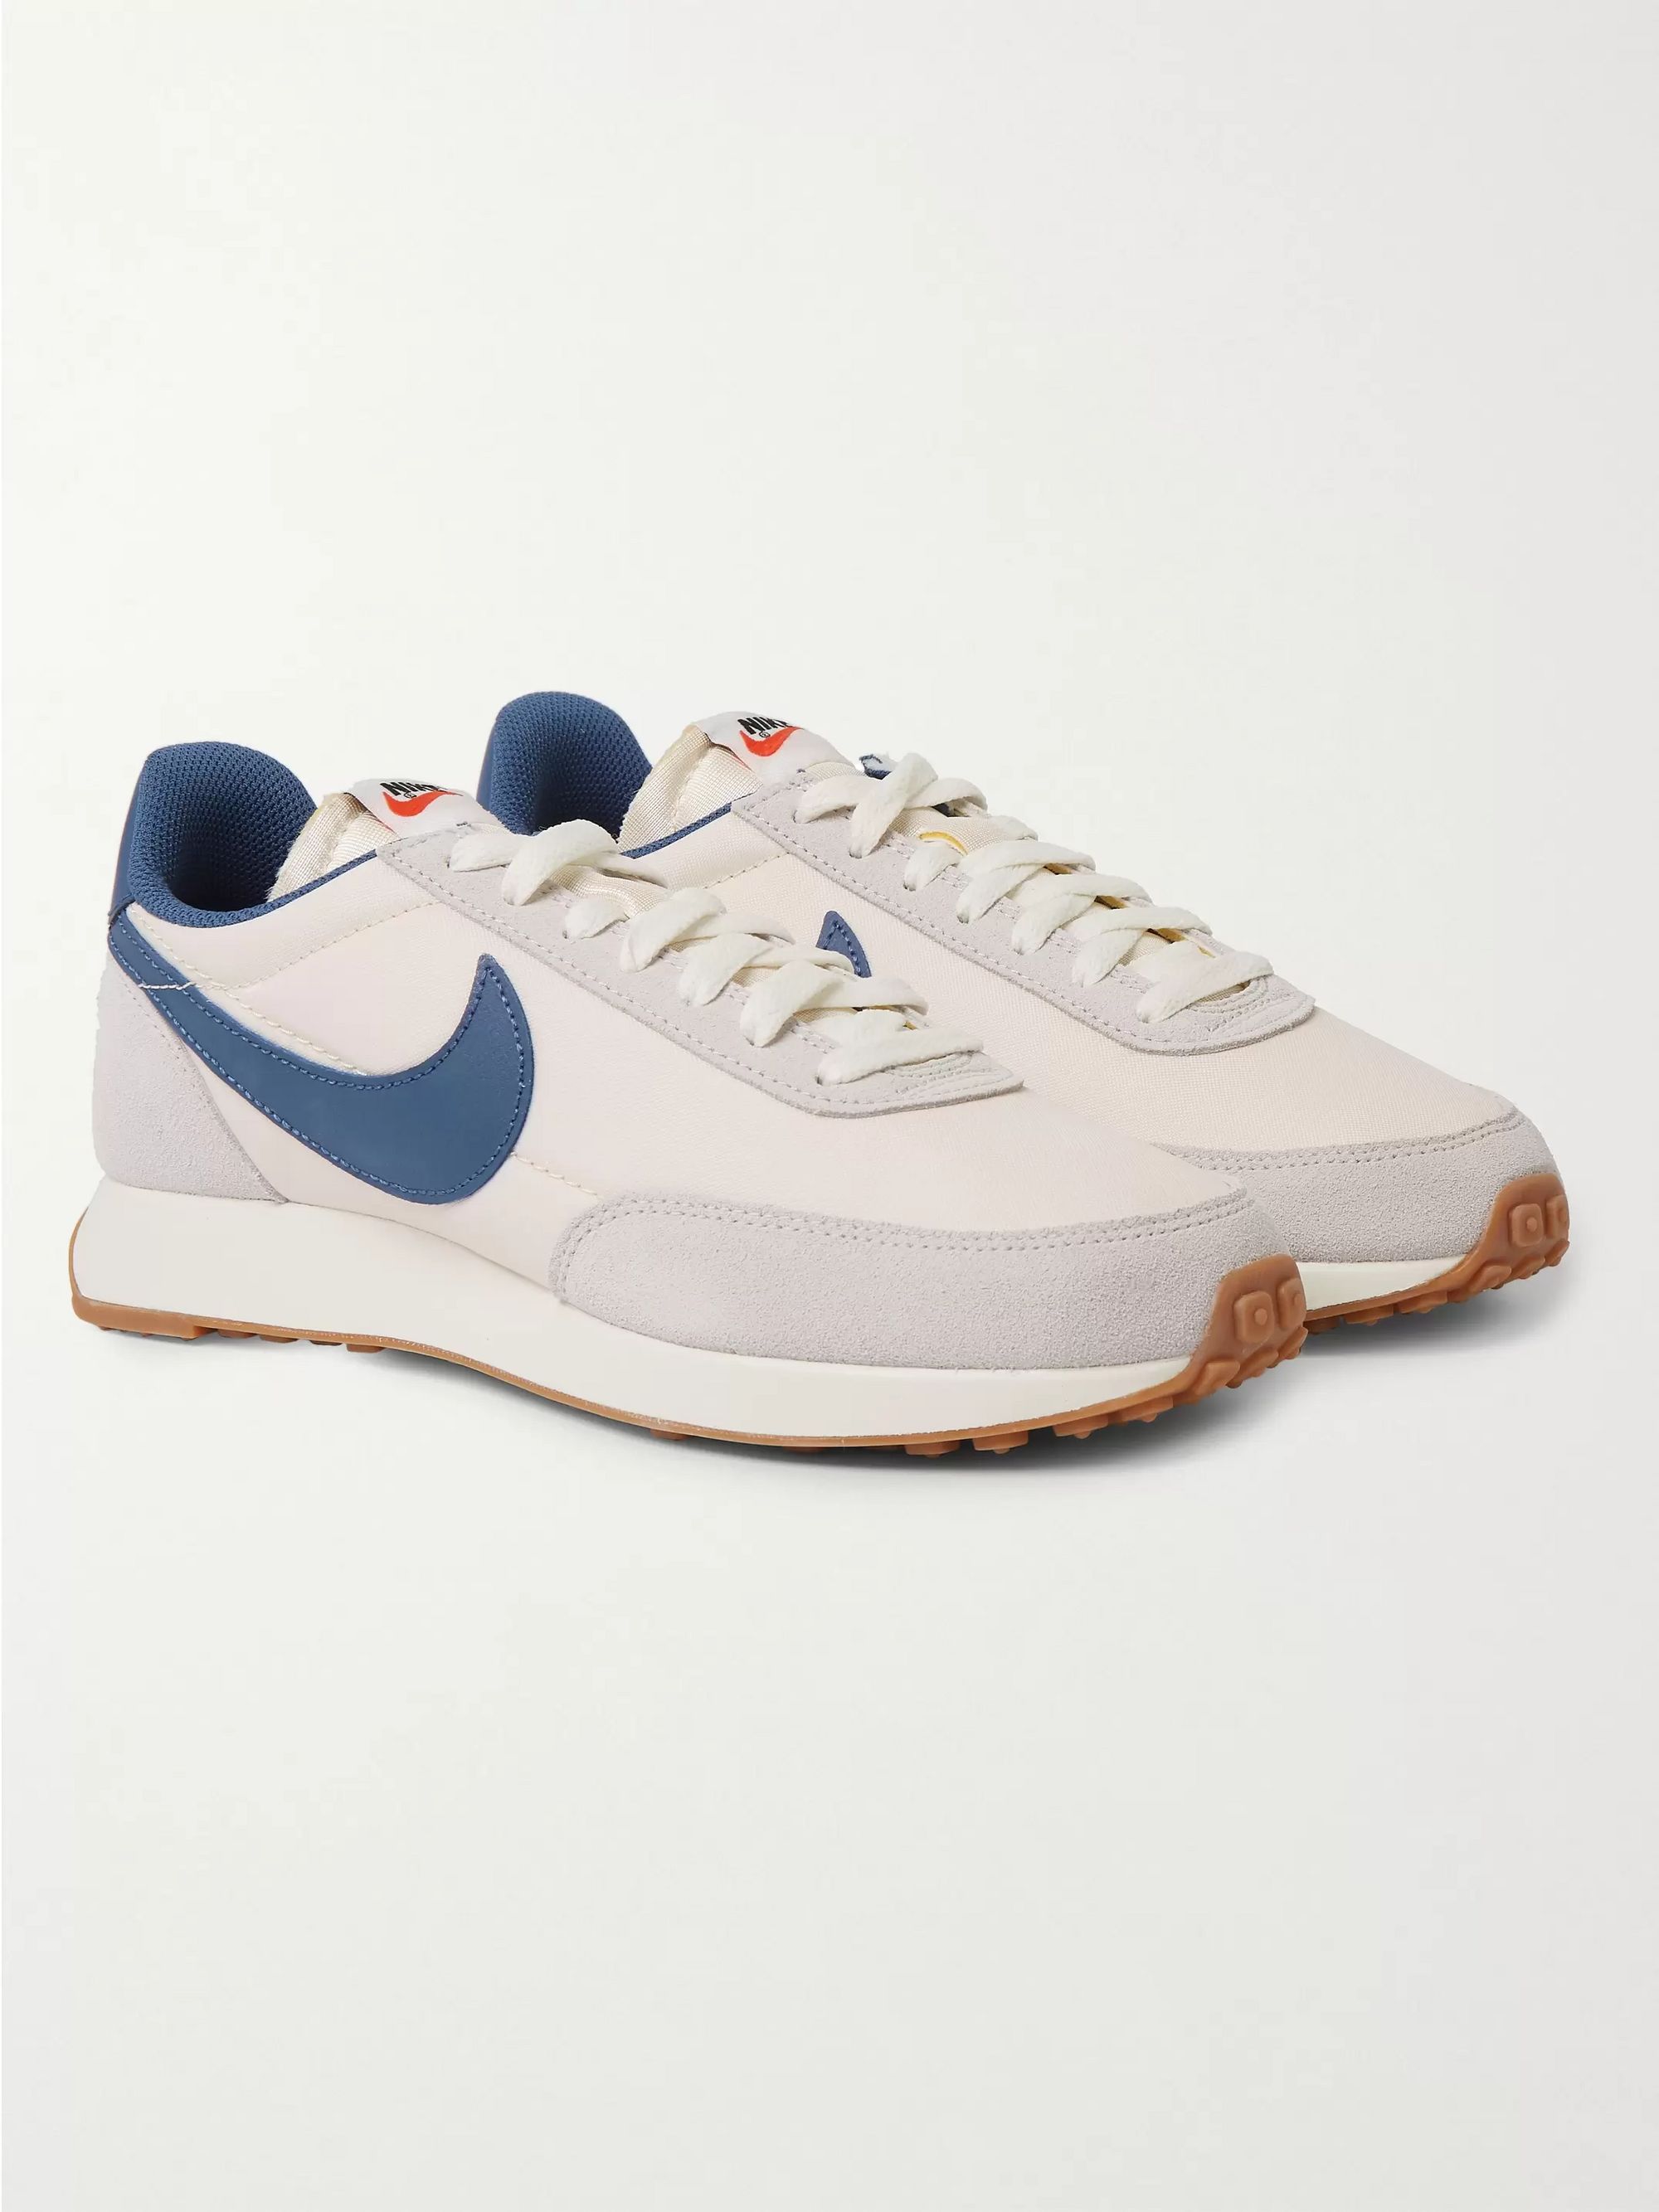 Off-white Air Tailwind 79 Shell, Suede and Leather Sneakers | Nike | MR ...